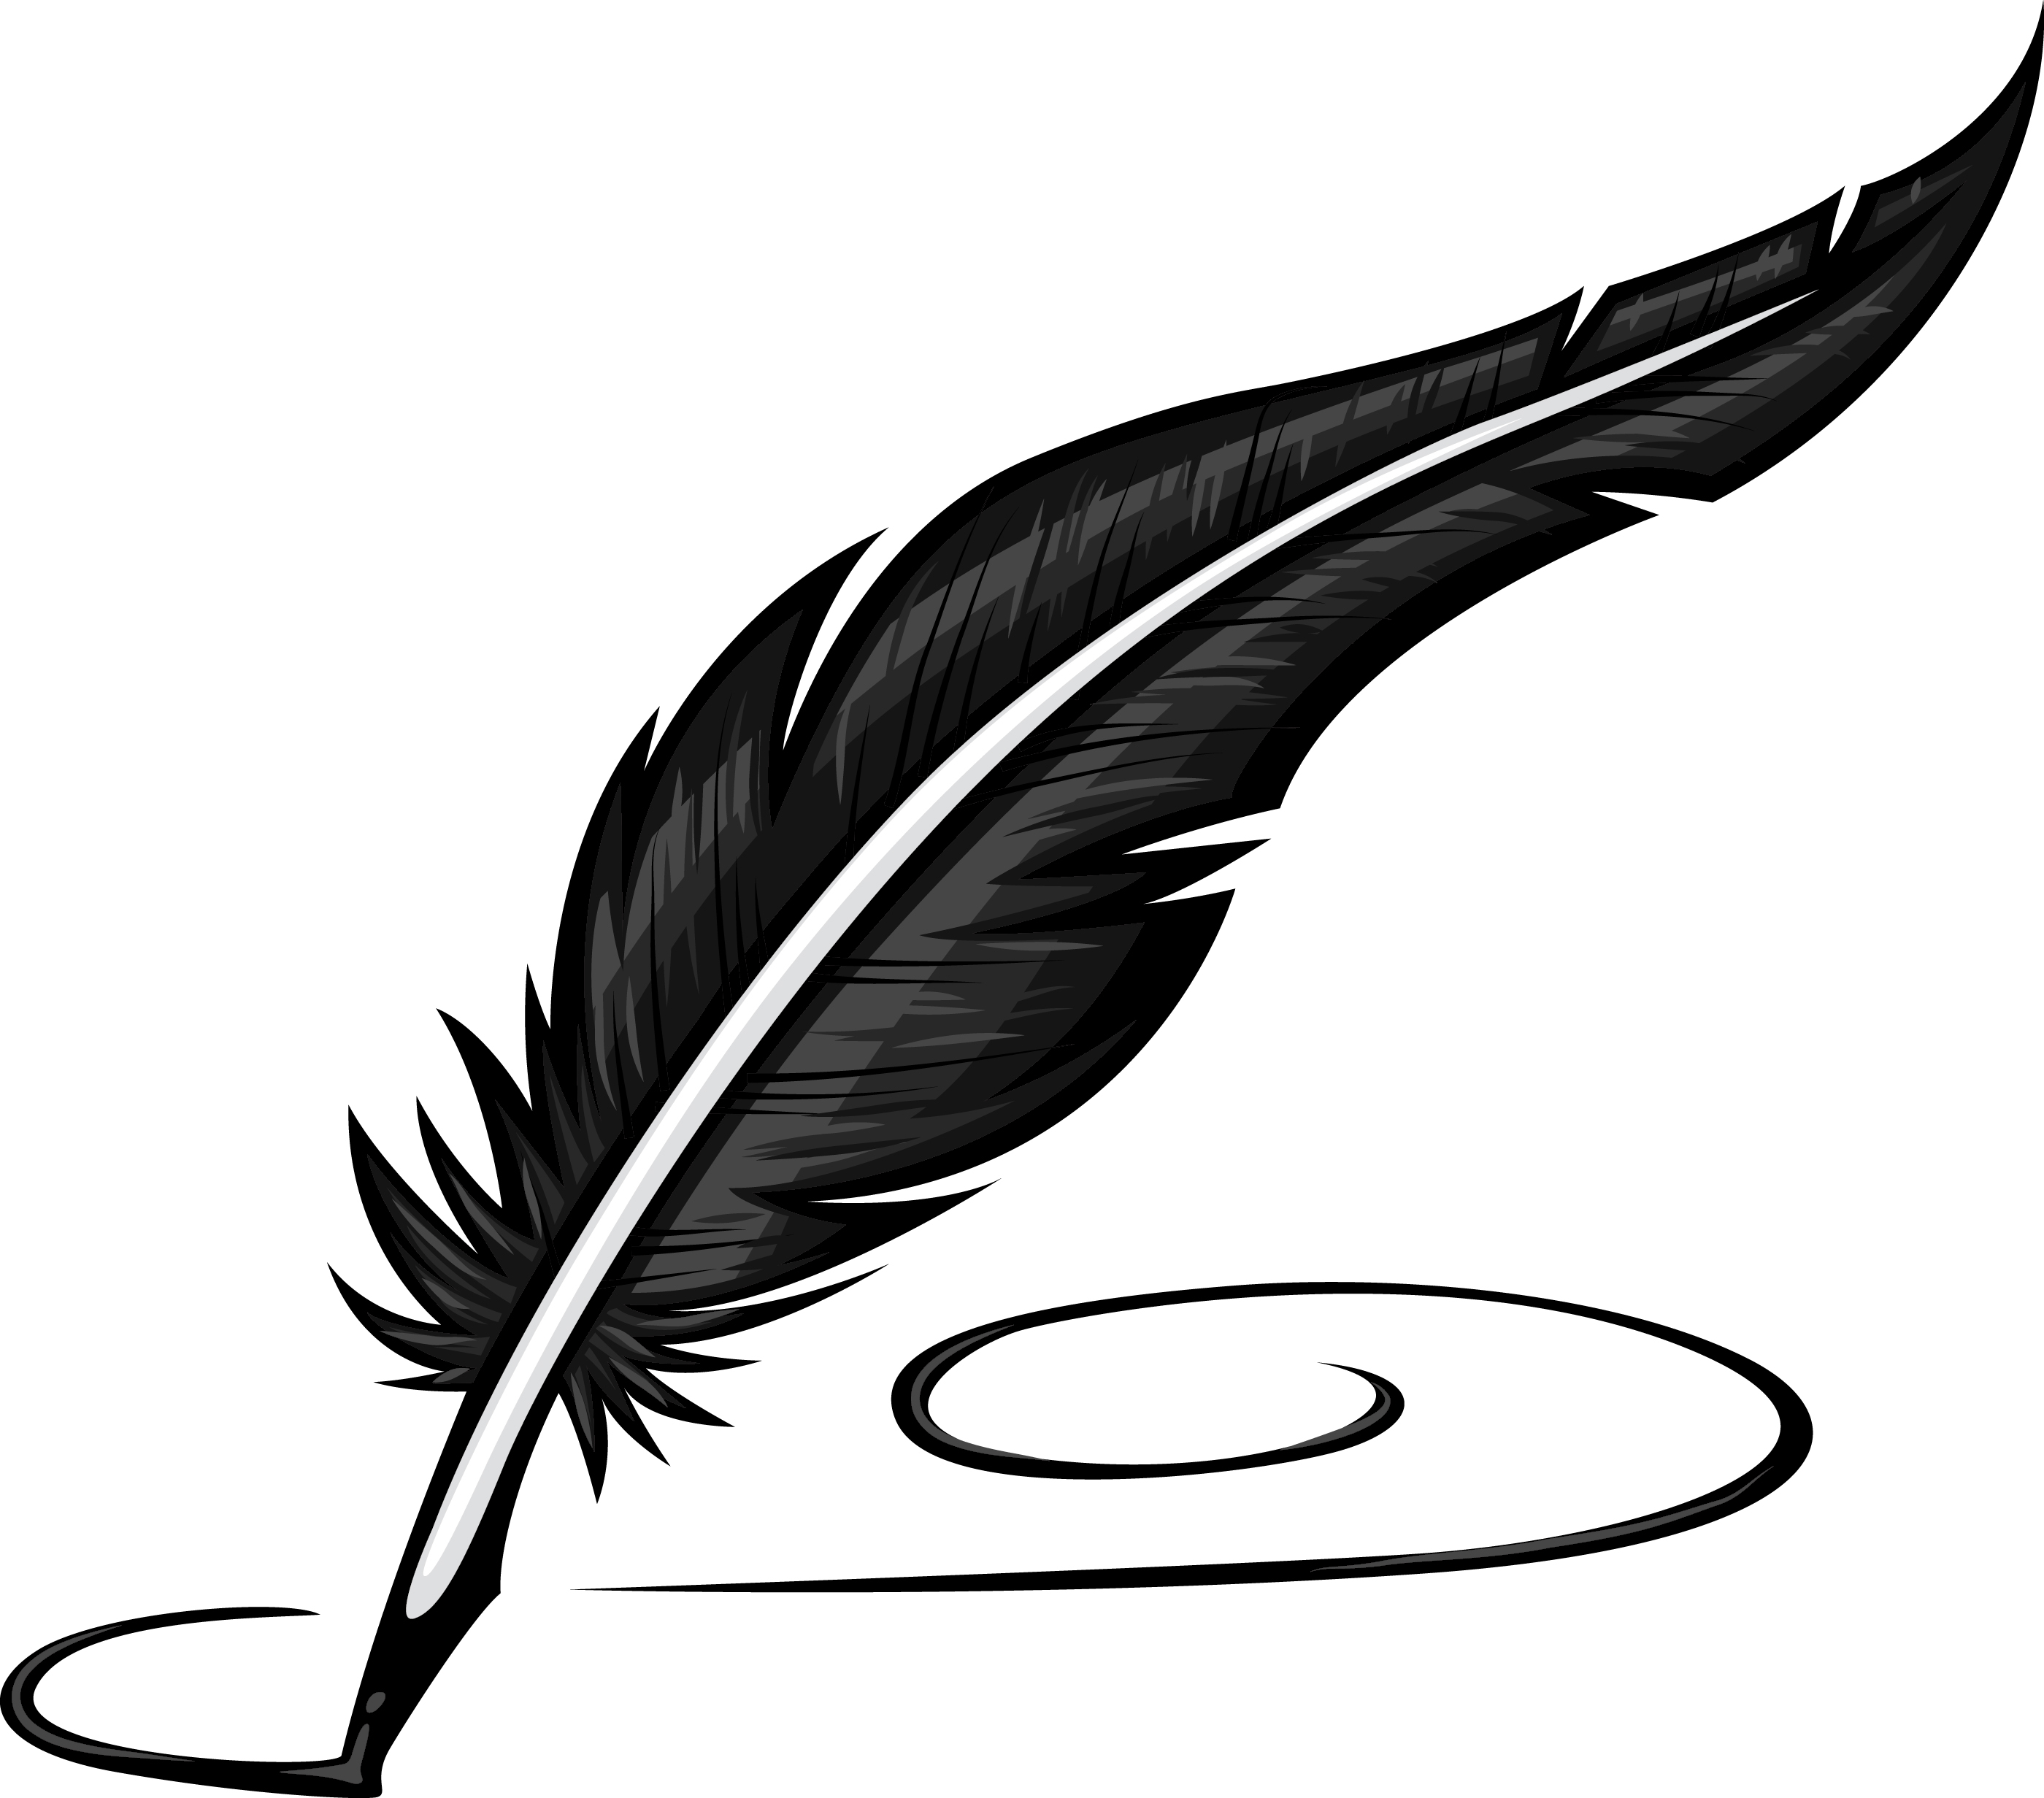 Feather Pen Hd Image Clipart